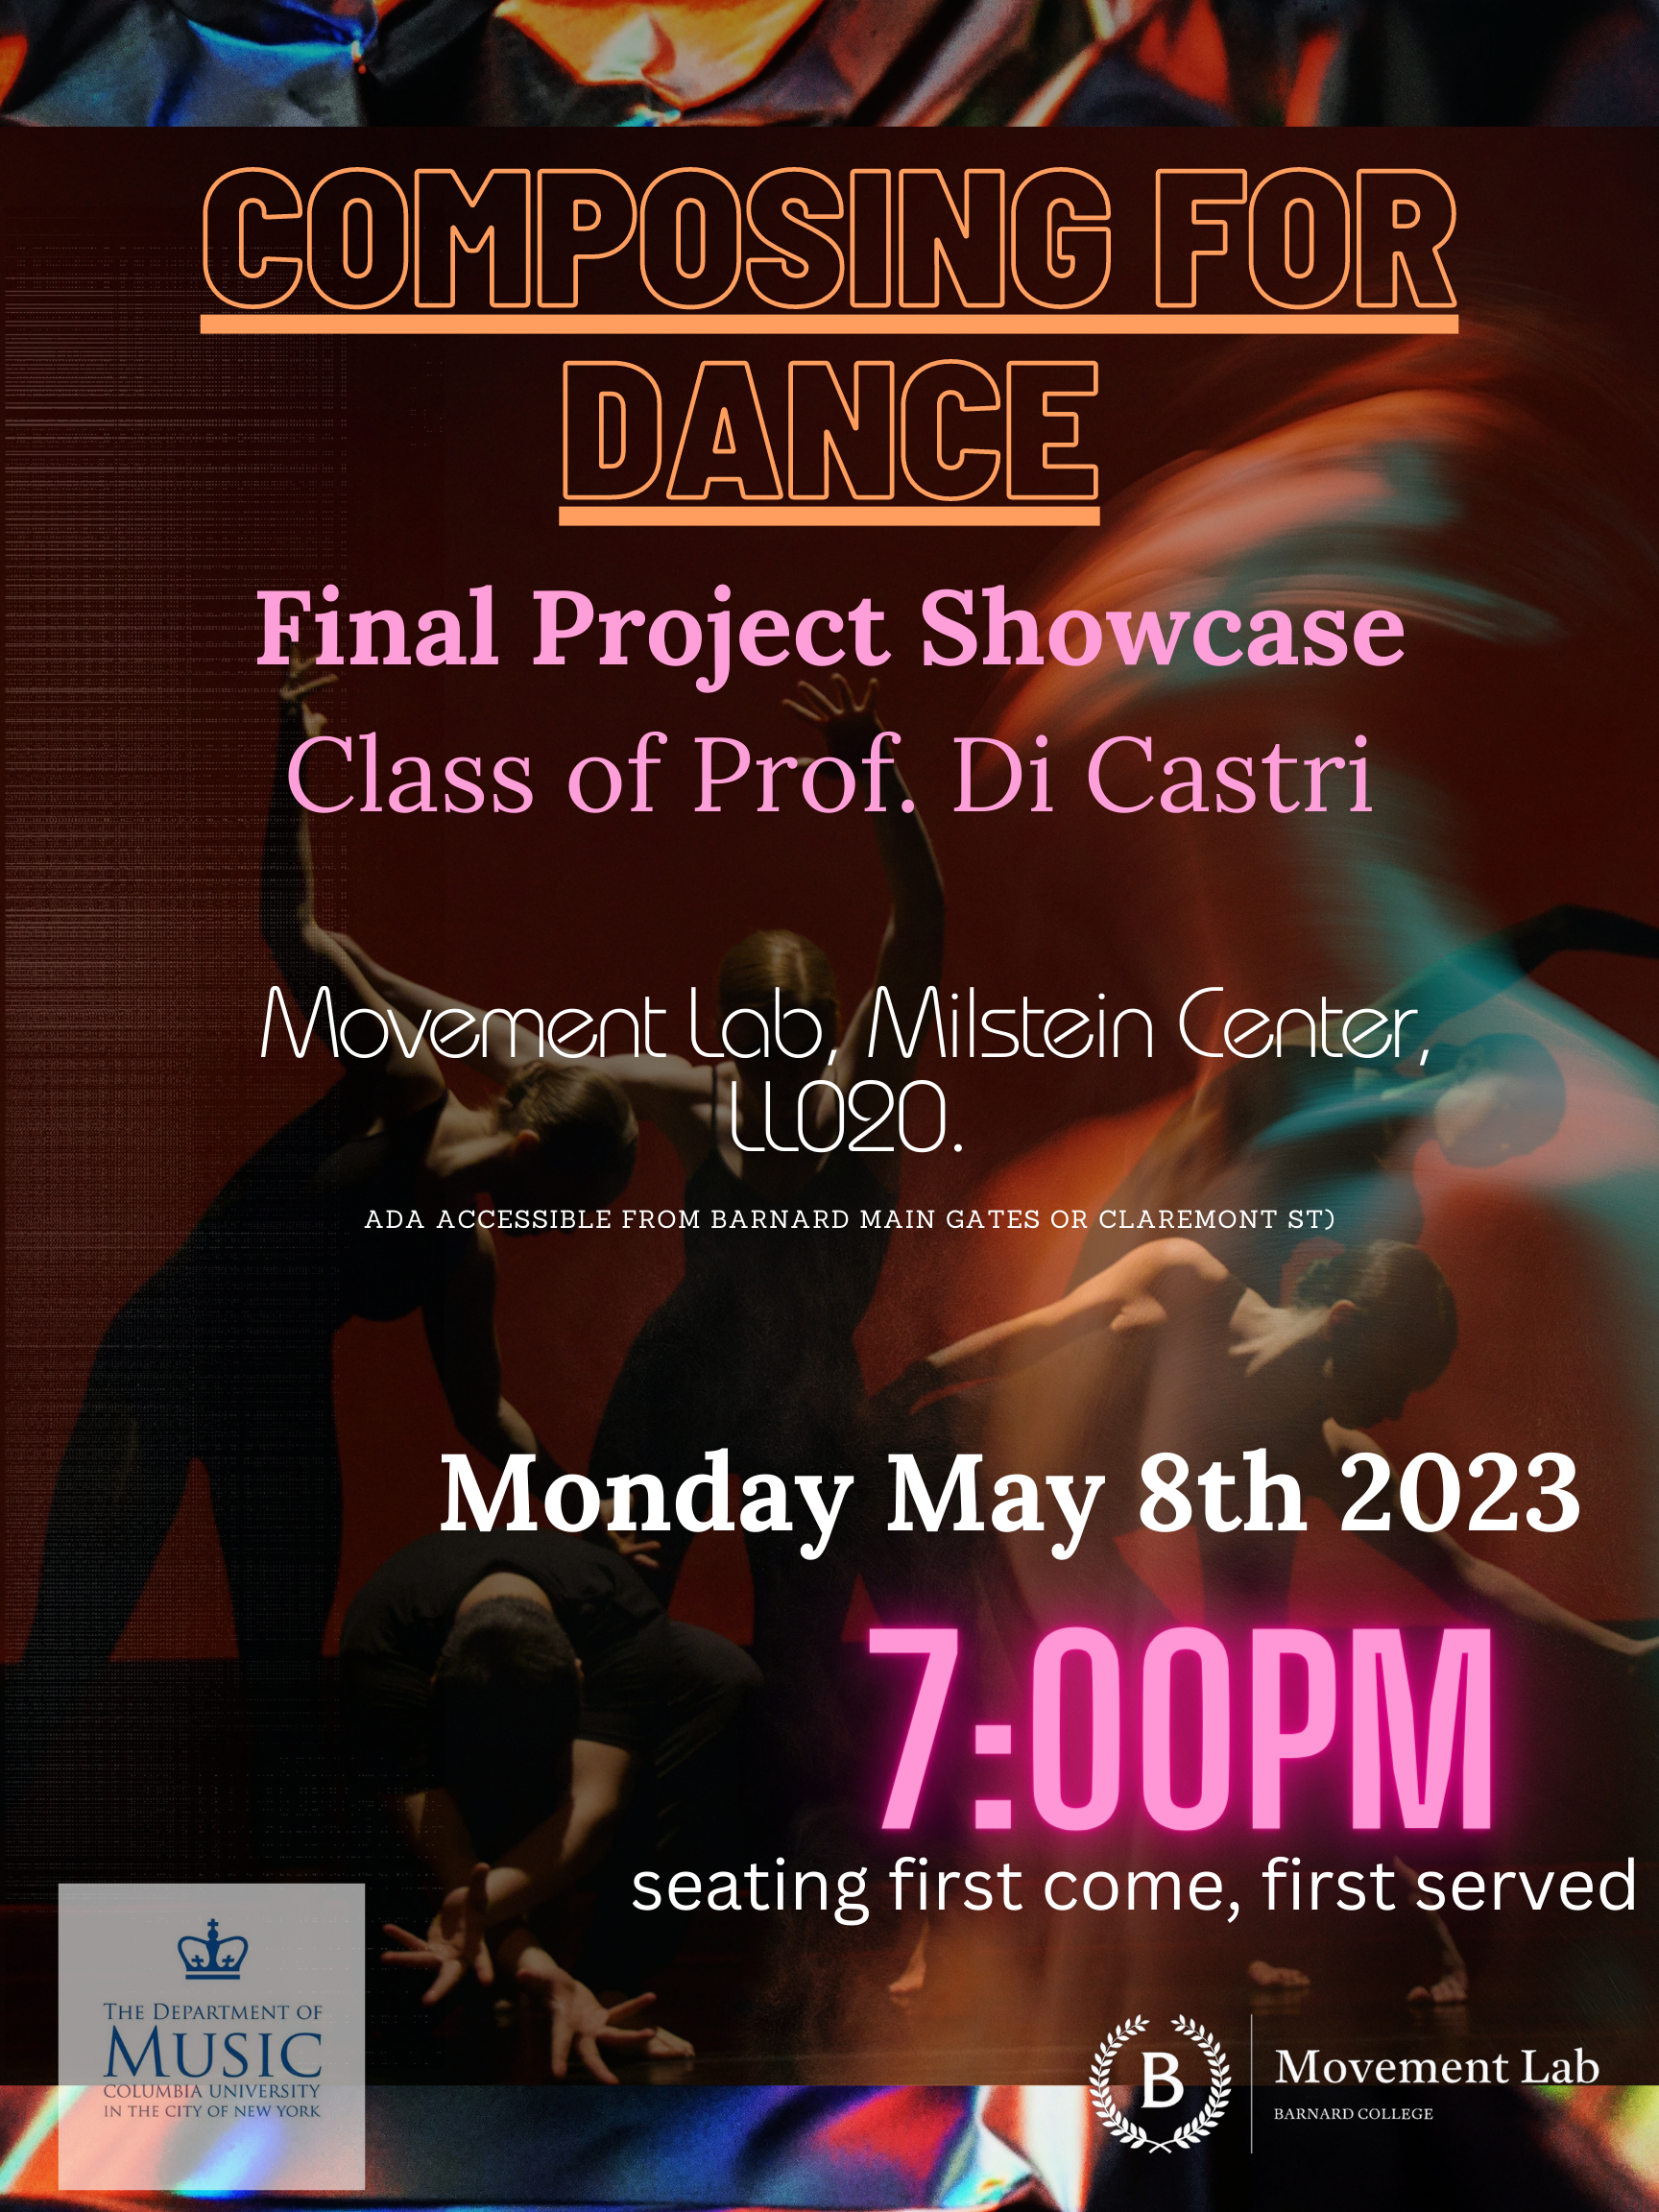 Composing for Dance poster with event info